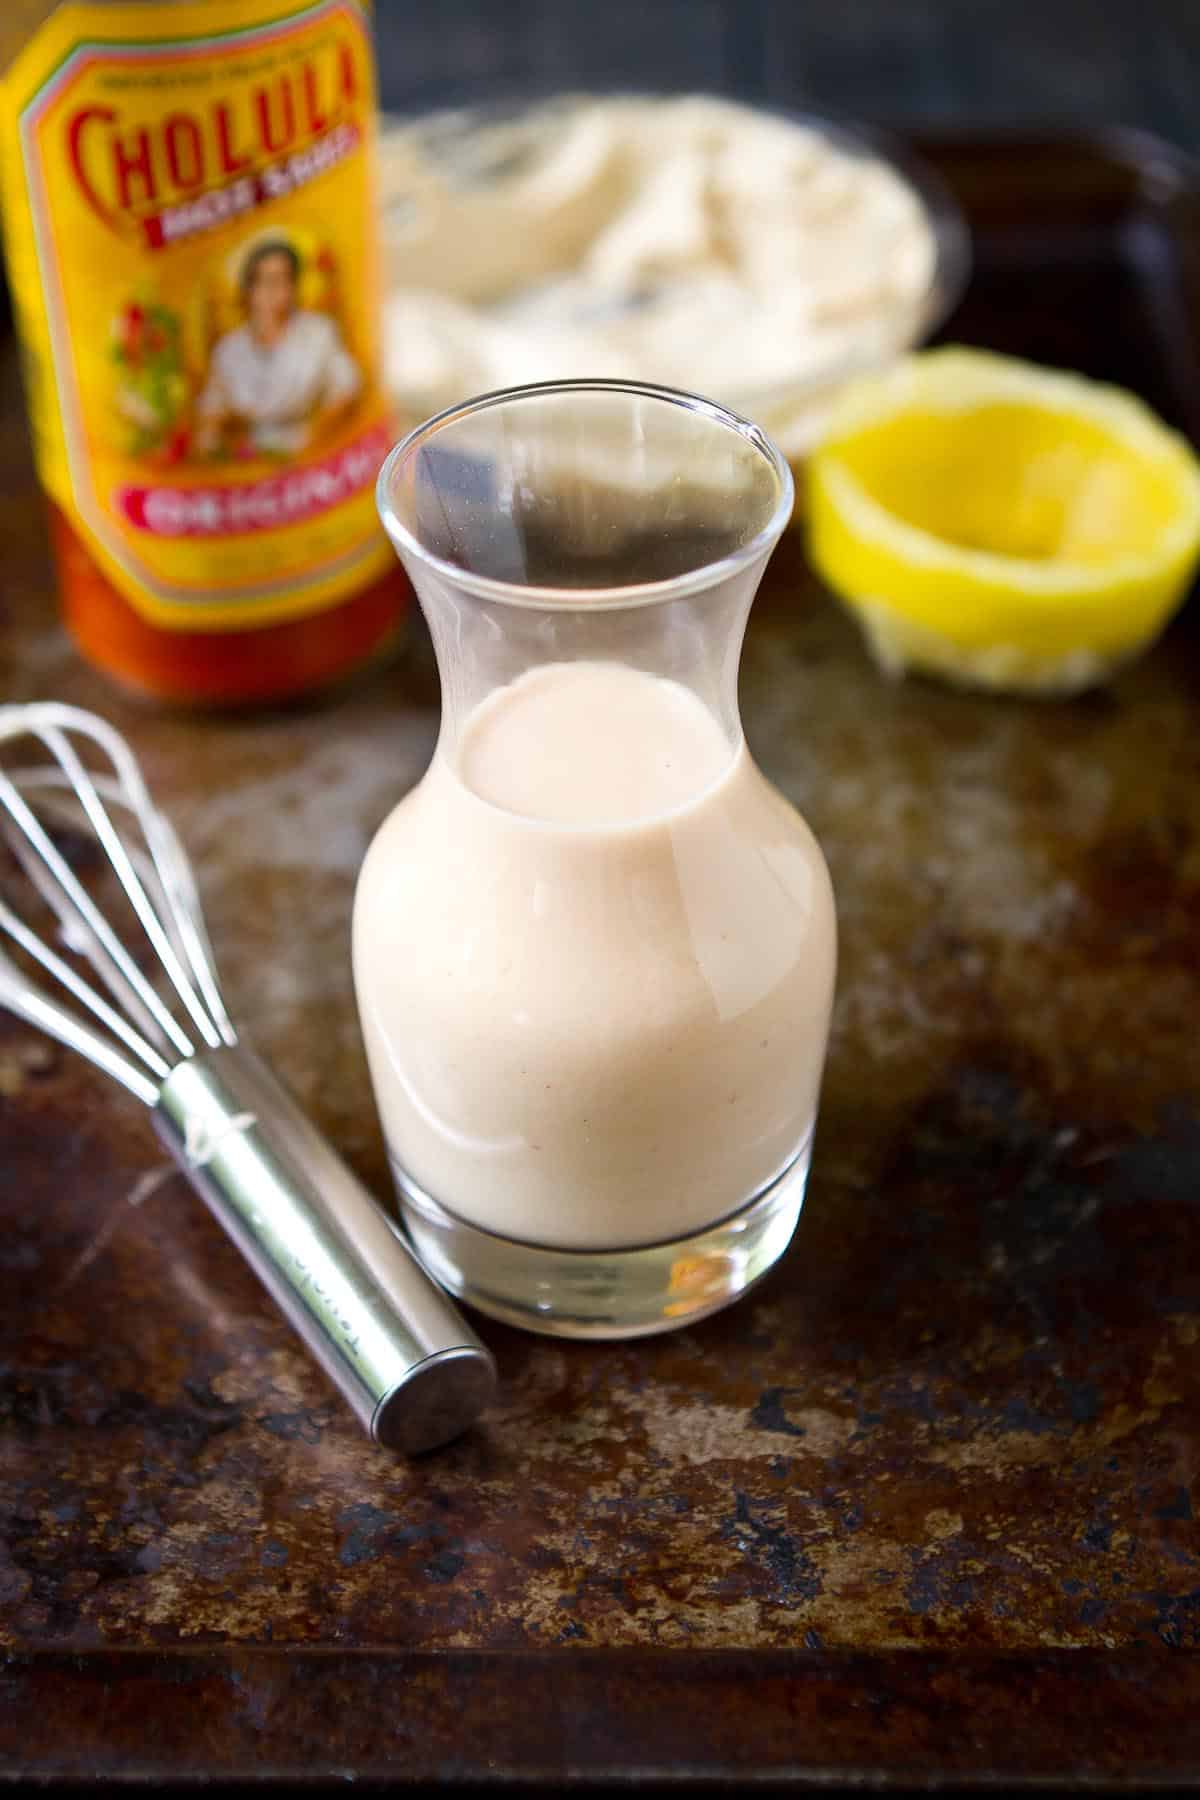 Glass carafe with salad dressing. Whisk, hot sauce and lemon on the side.